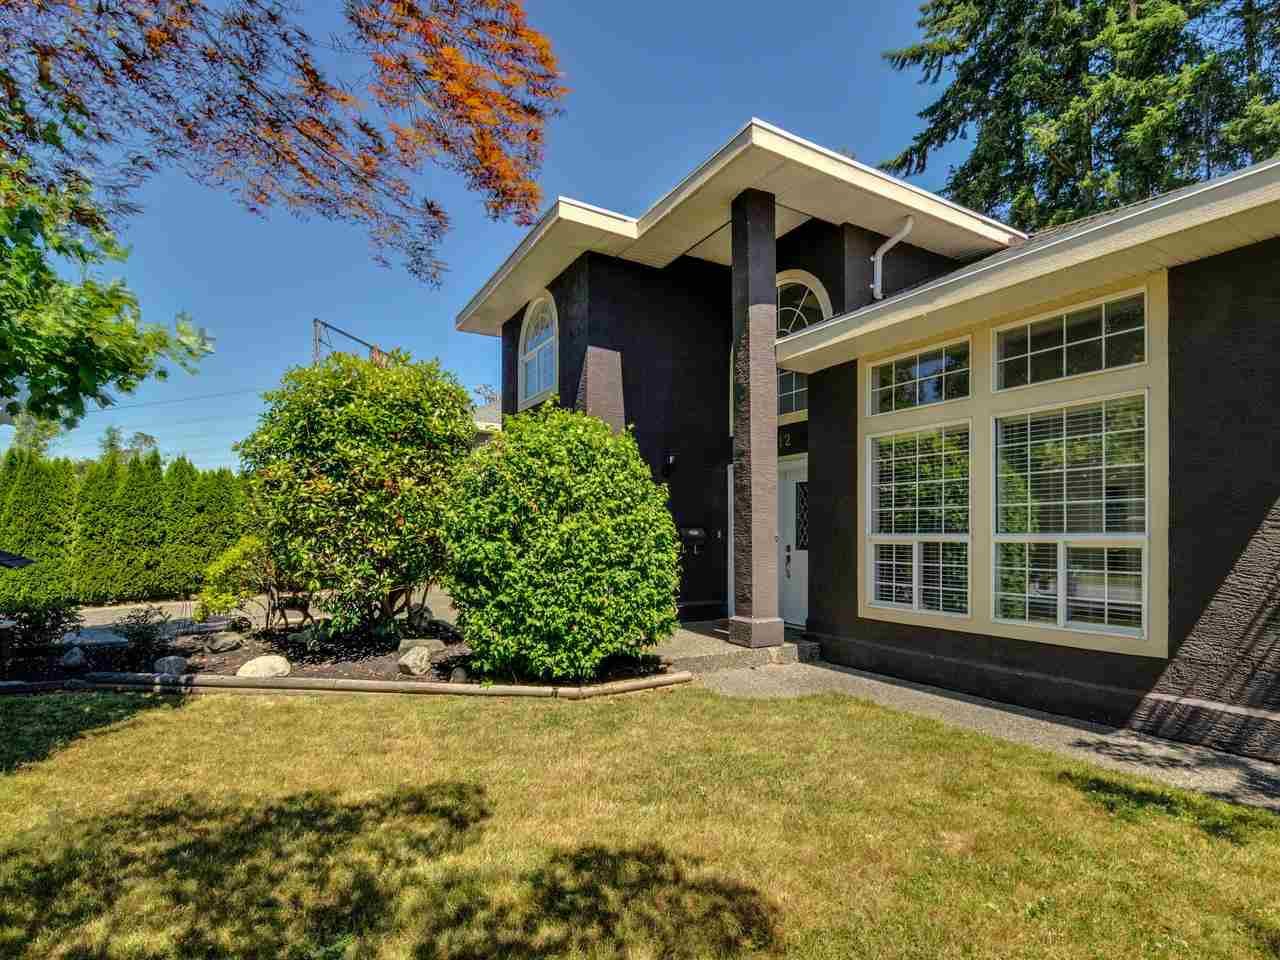 Main Photo: 5812 185A STREET in Surrey: Cloverdale BC House for sale (Cloverdale)  : MLS®# R2335126